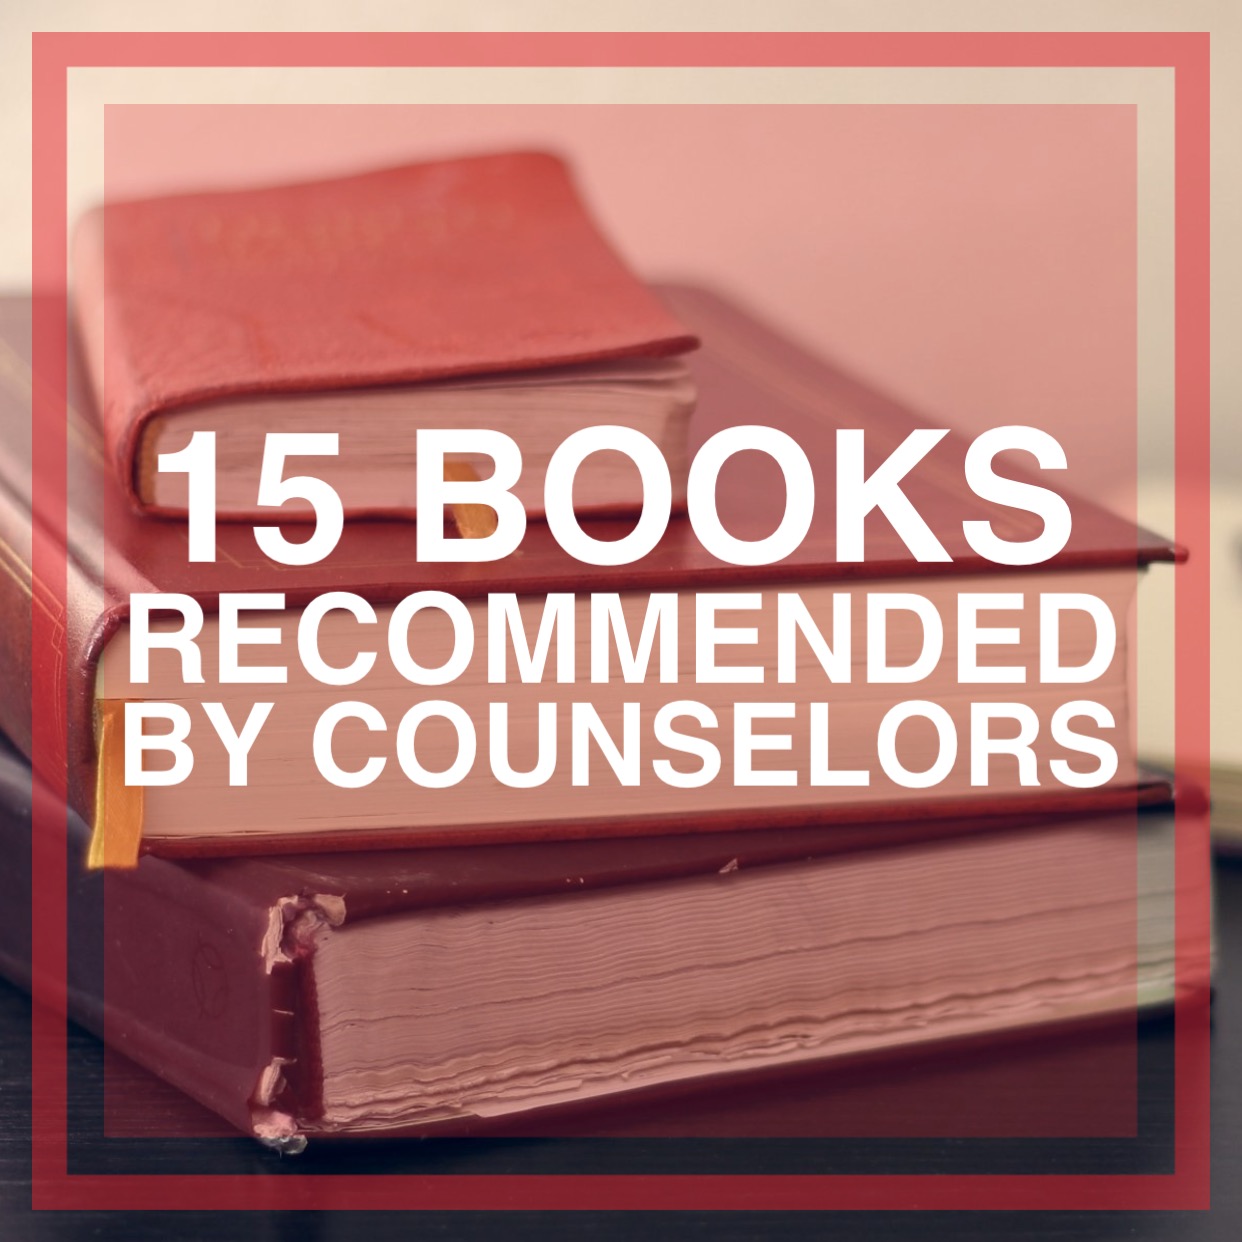 15 Books Recommended By Counselors